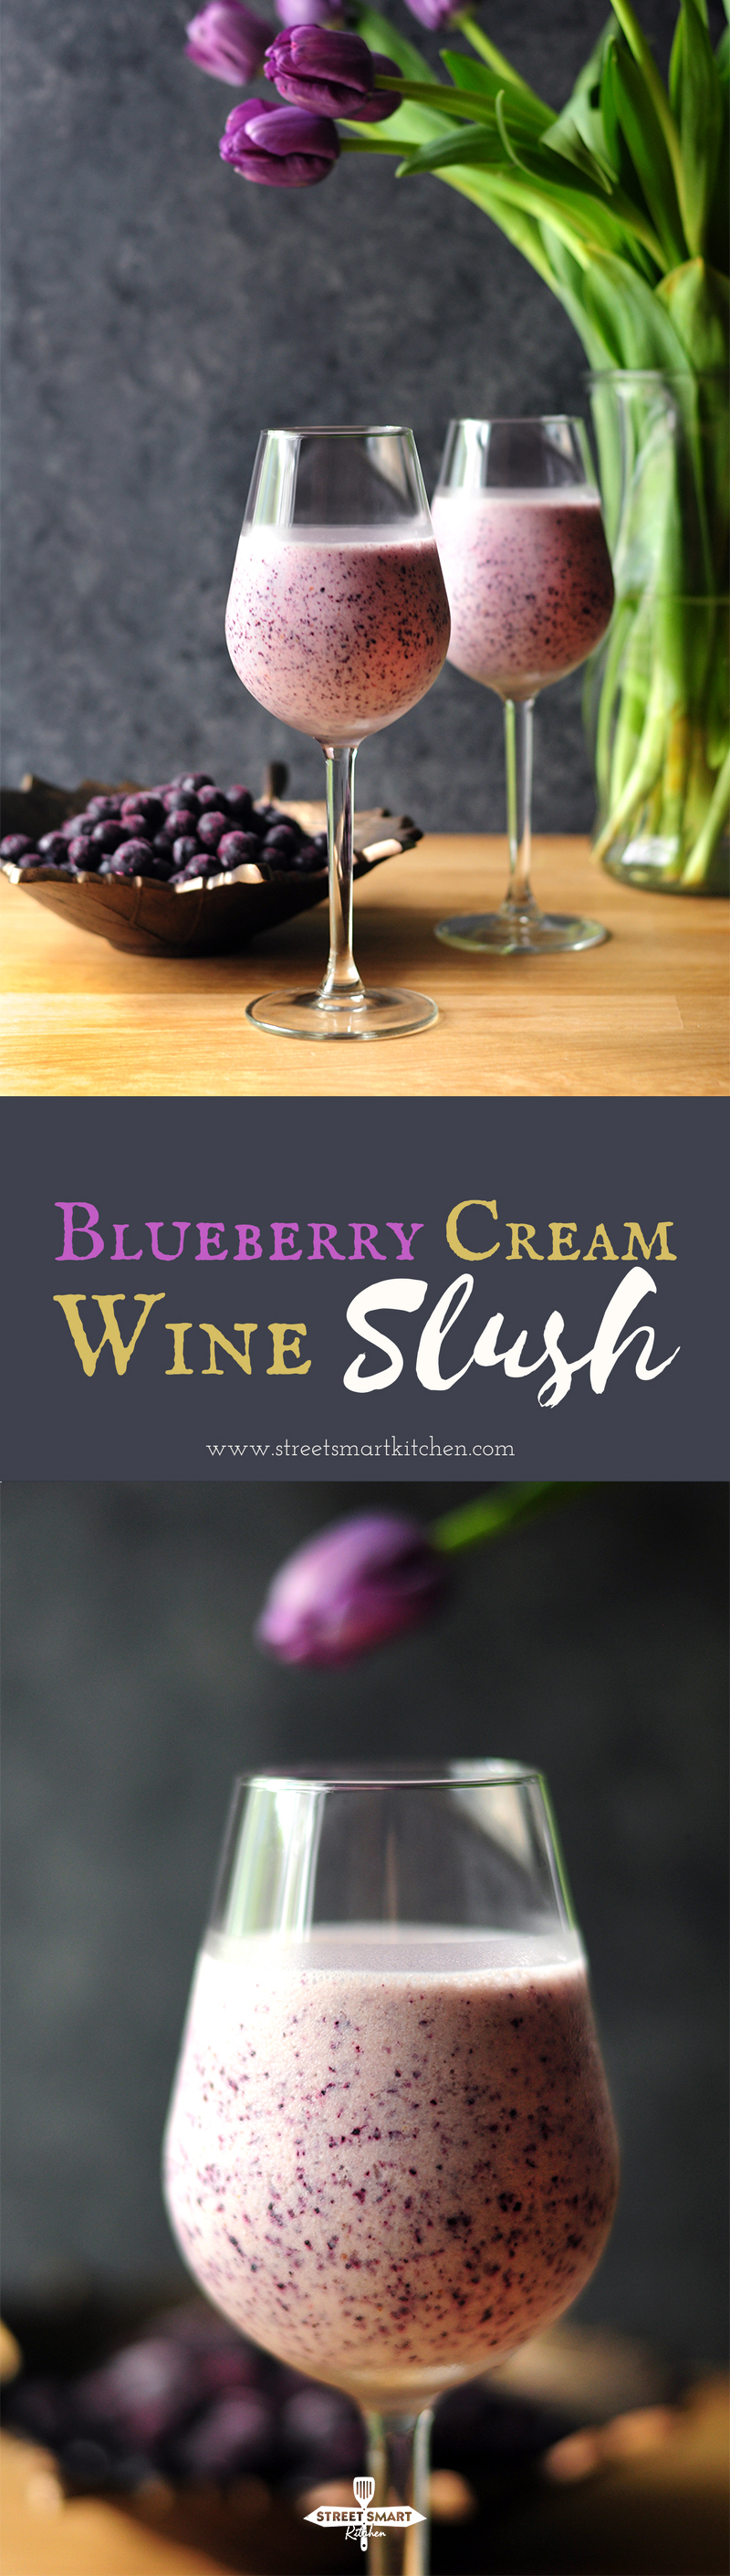 When blueberry meets vanilla ice cream, it’s good. When blueberry meets vanilla ice cream and crisp white wine, it’s even better. Spoil yourself with this fun blueberry cream wine slush in the holiday or anytime you like because it takes pretty much no time to make.